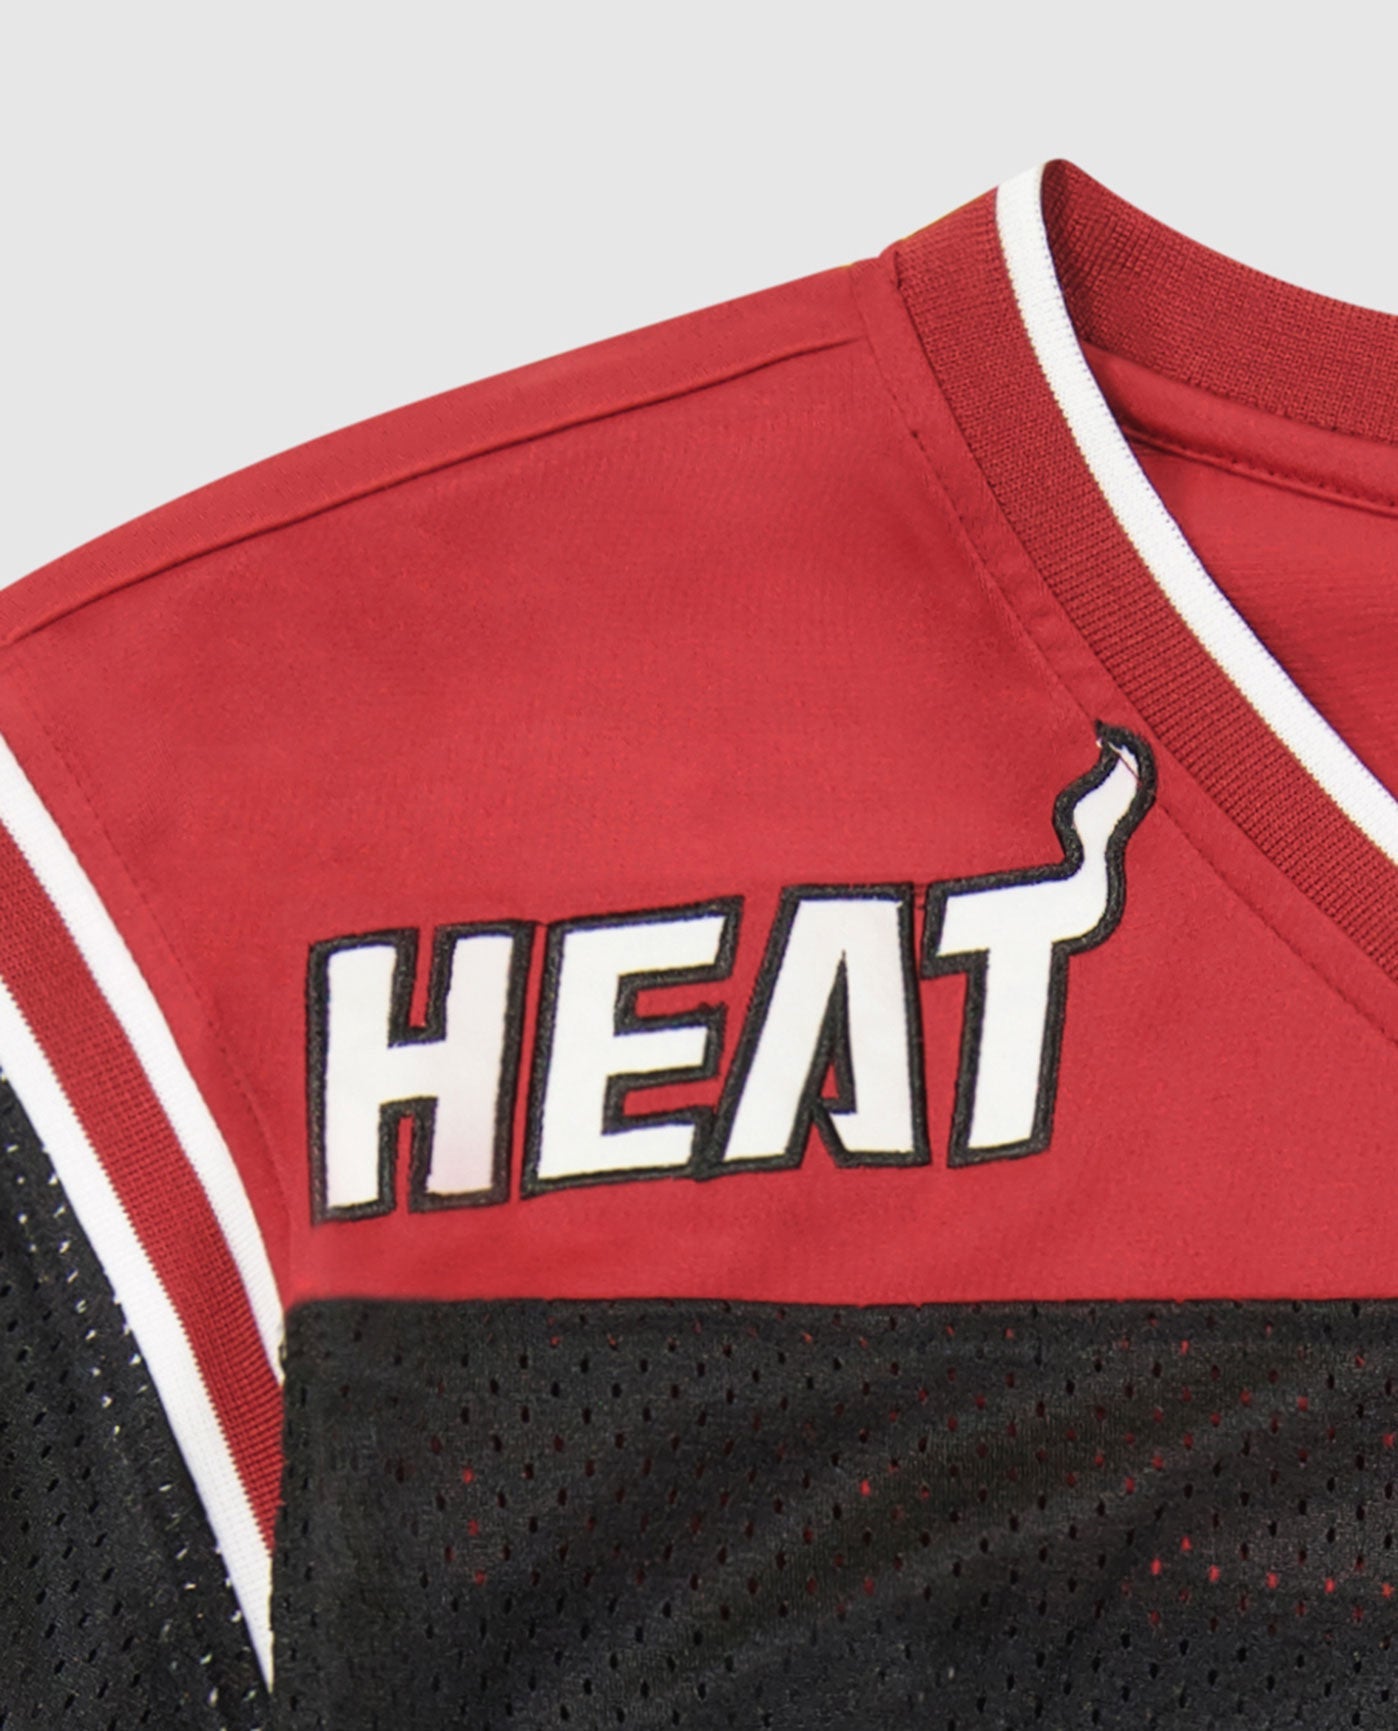 black and red heat jersey